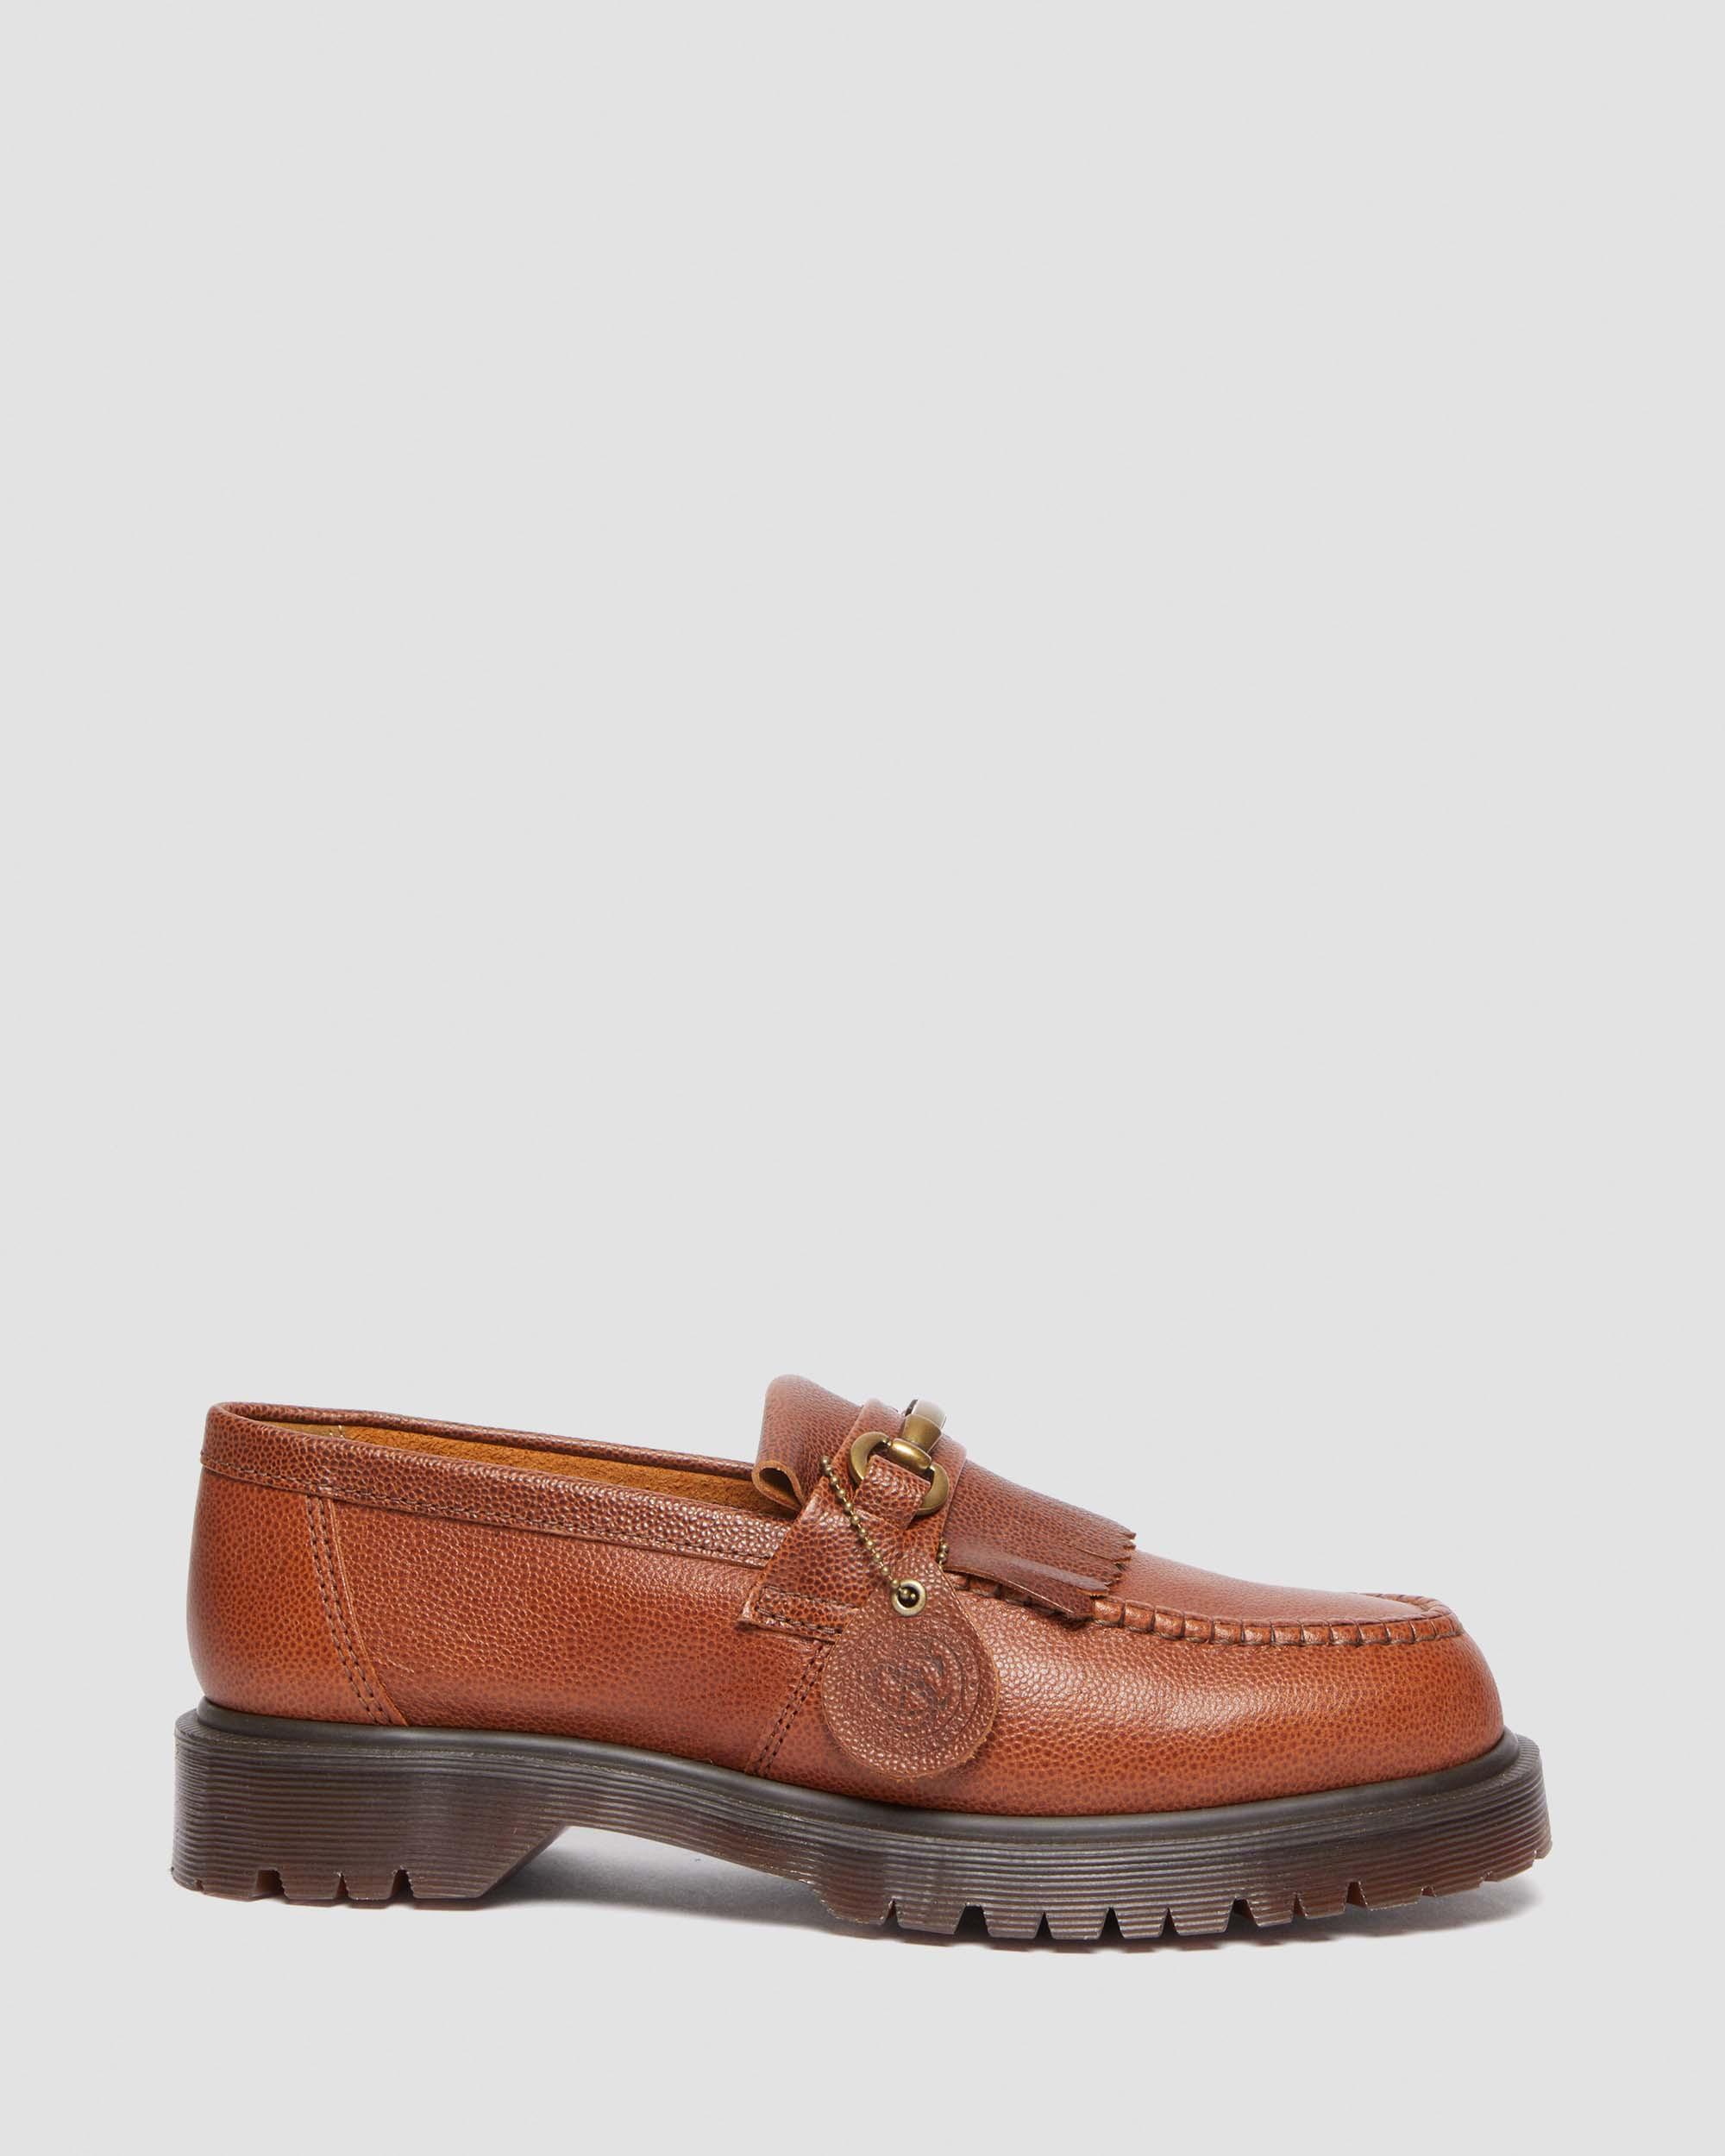 Adrian Snaffle Westminster Leather Loafers WhiskeyAdrian Snaffle Westminster Leather Loafers Dr. Martens